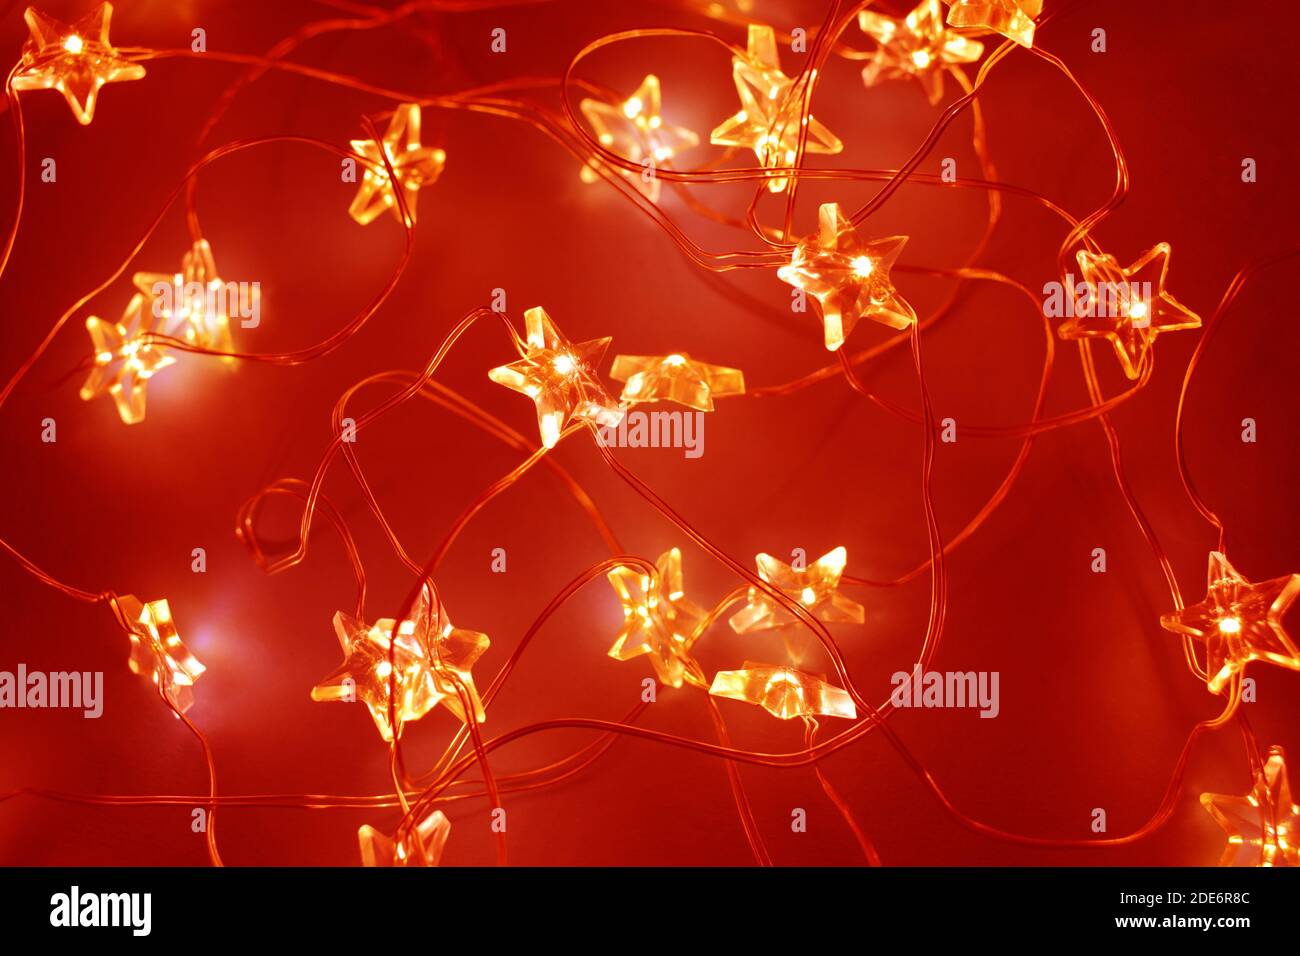 Christmas festive garlands in the shape of a star. Glowing festive golden bokeh. Red background for design. Stock Photo